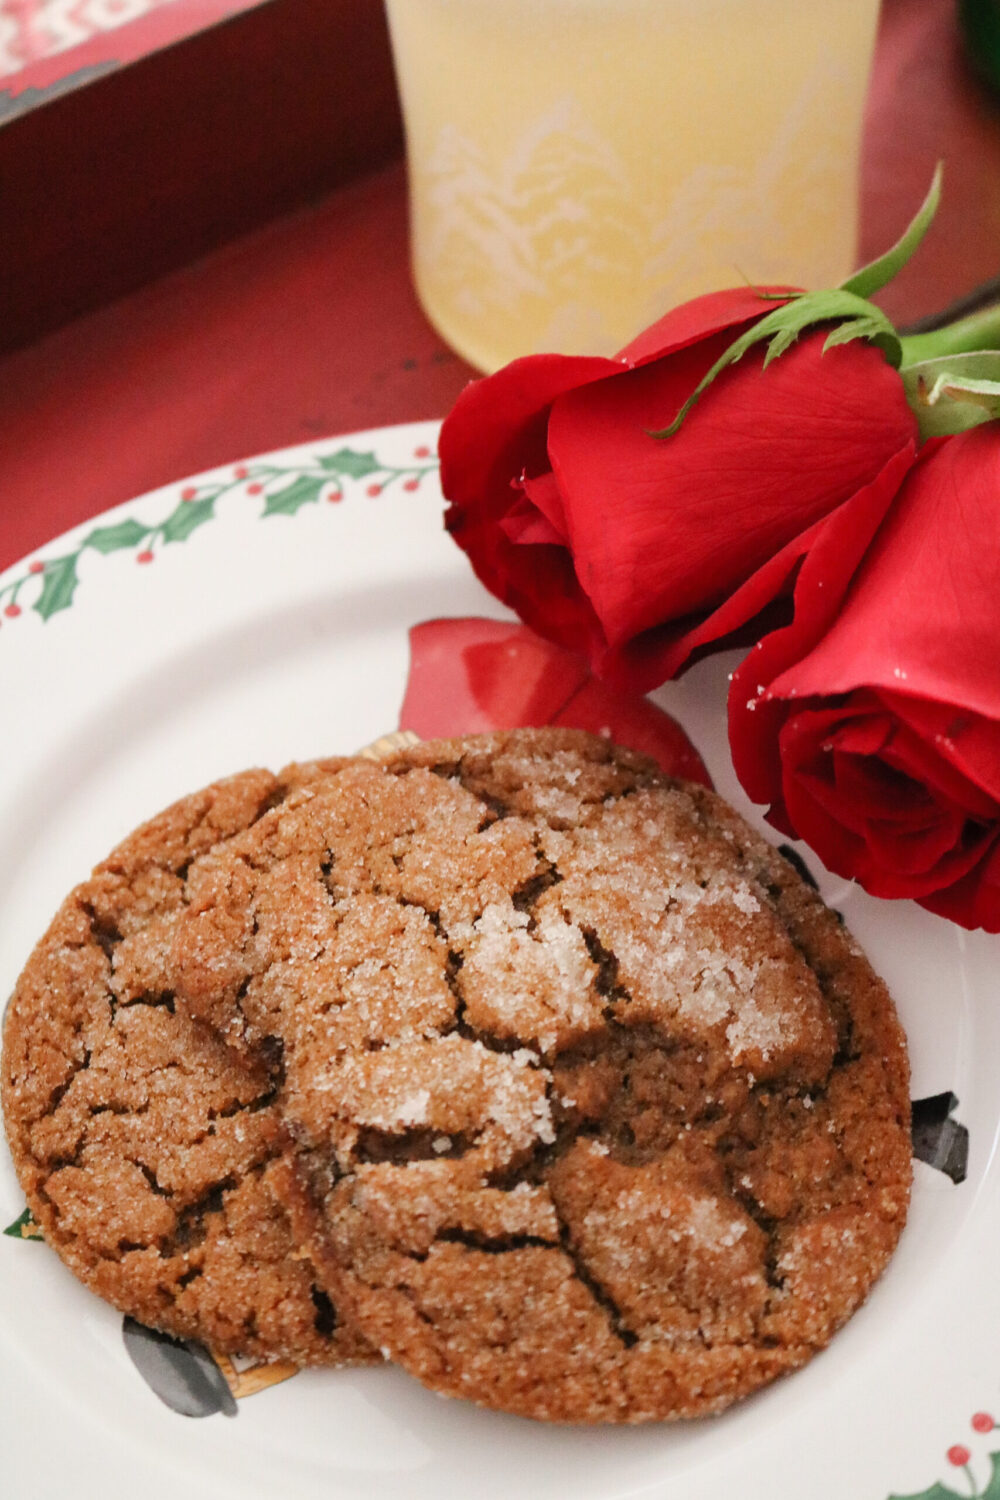 Chewy Vegan Molasses Cookie Recipe for the Holidays by Candace Cameron Bure I Dreaminlace.com #veganrecipes #christmascookie #ChristmasRecipe